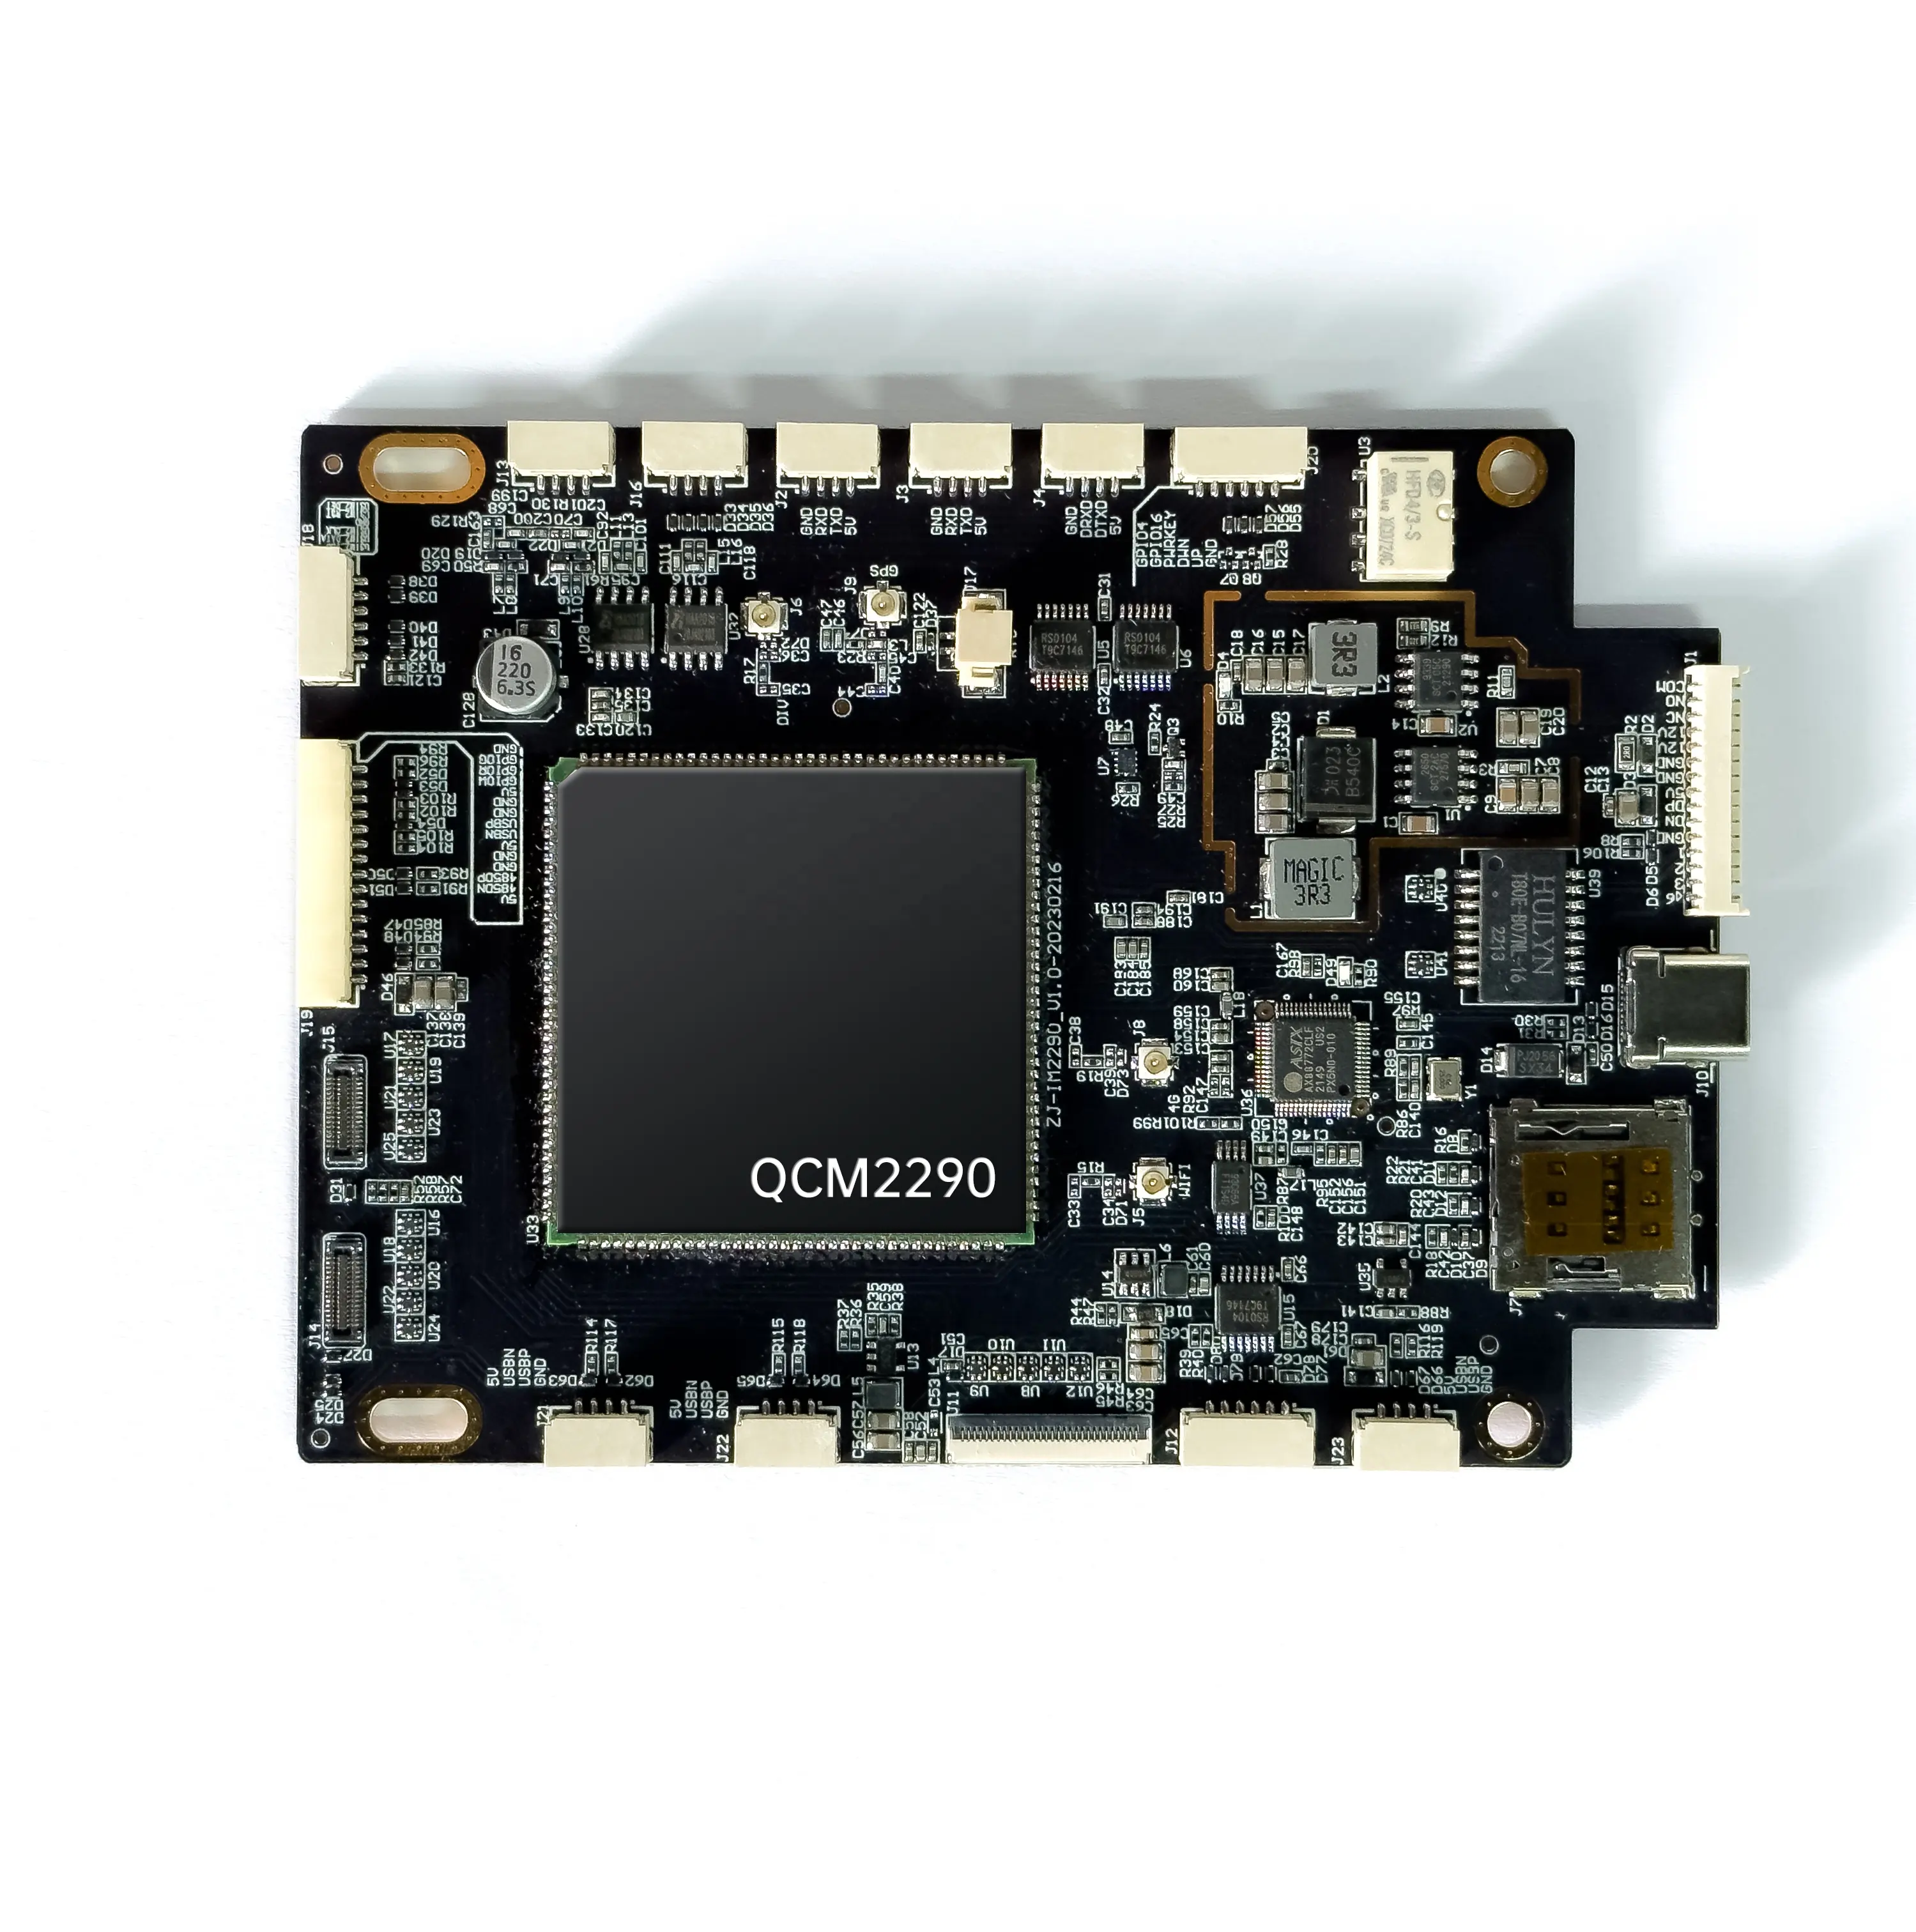 Qualcomm QCM2290 scheda di sviluppo Android GT290 con display touch per scheda madre MID, PND, POS, router, vehicle smart LTE Cat 4